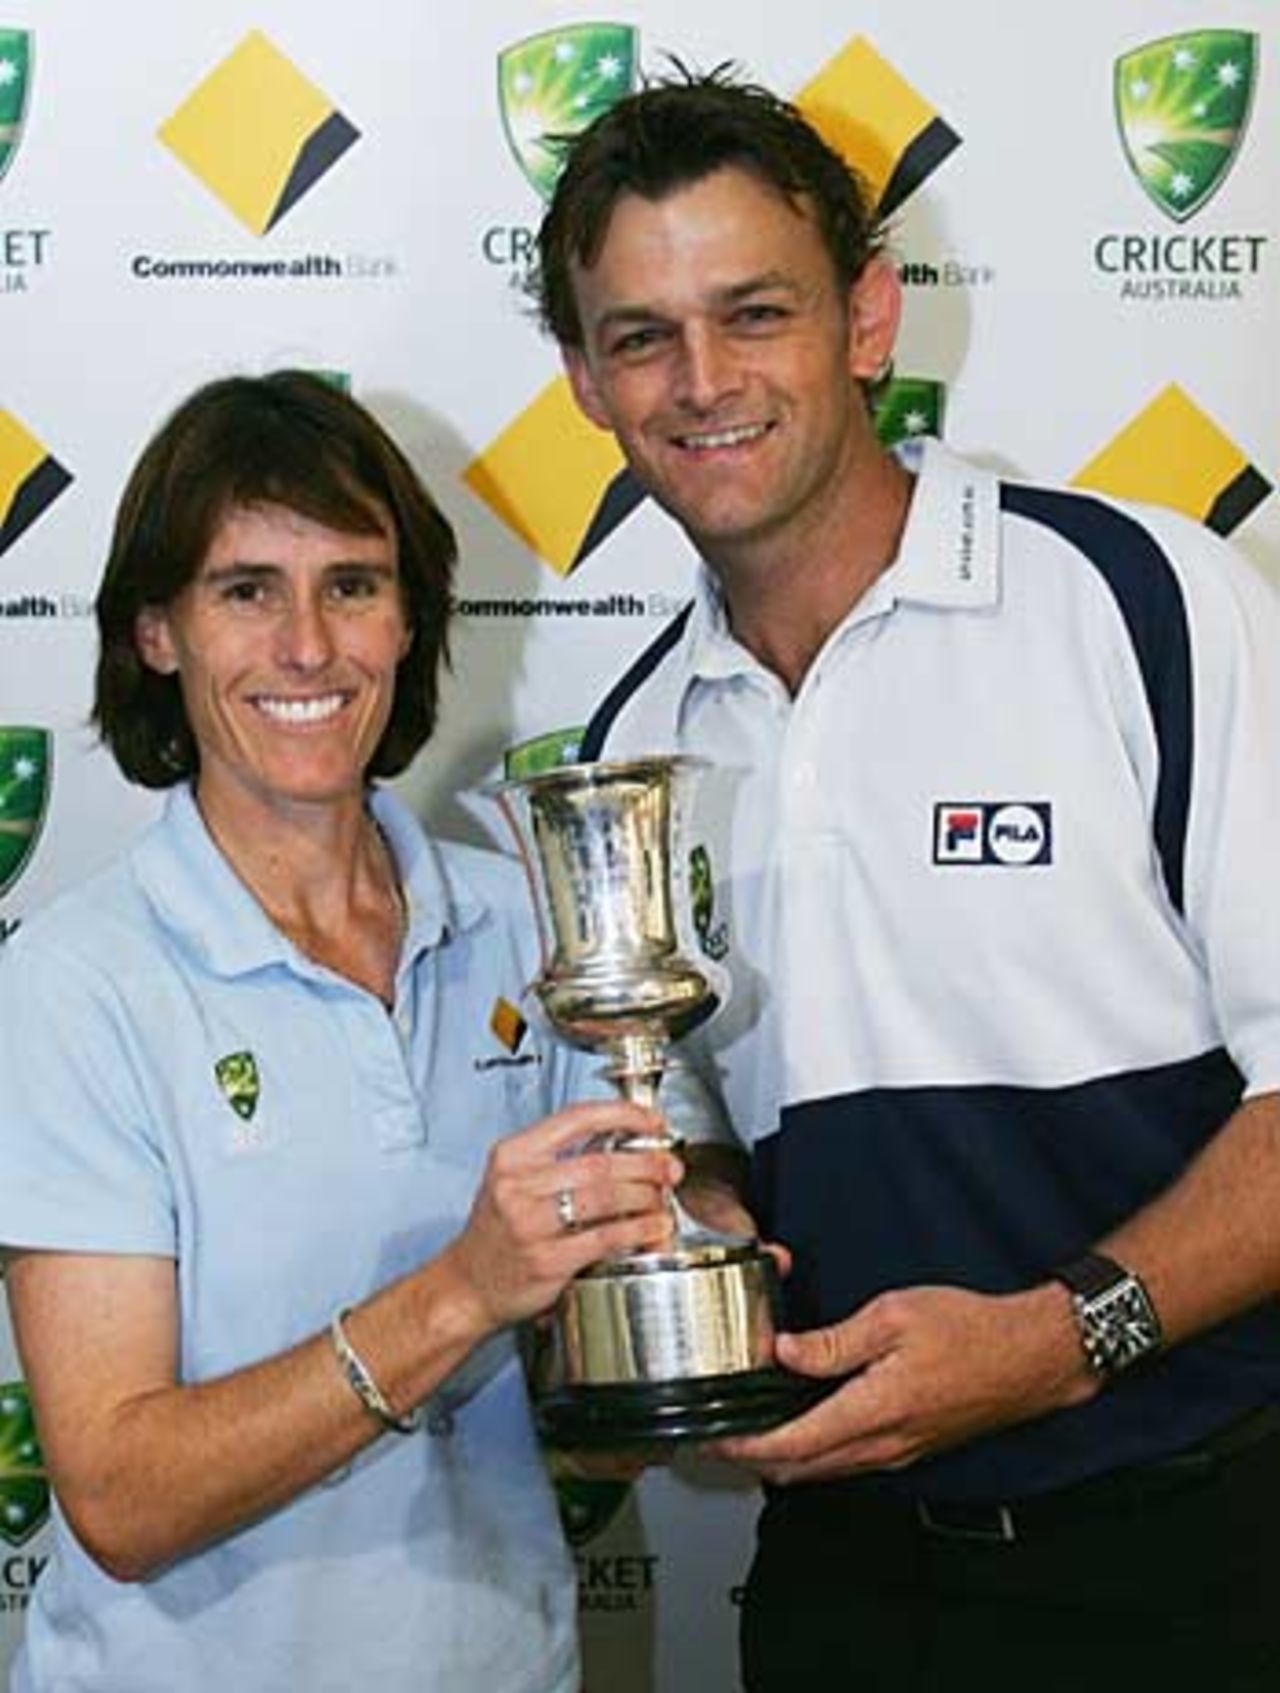 Belinda Clark and Adam Gilchrist pose with the World Cup, Perth, April 13, 2005